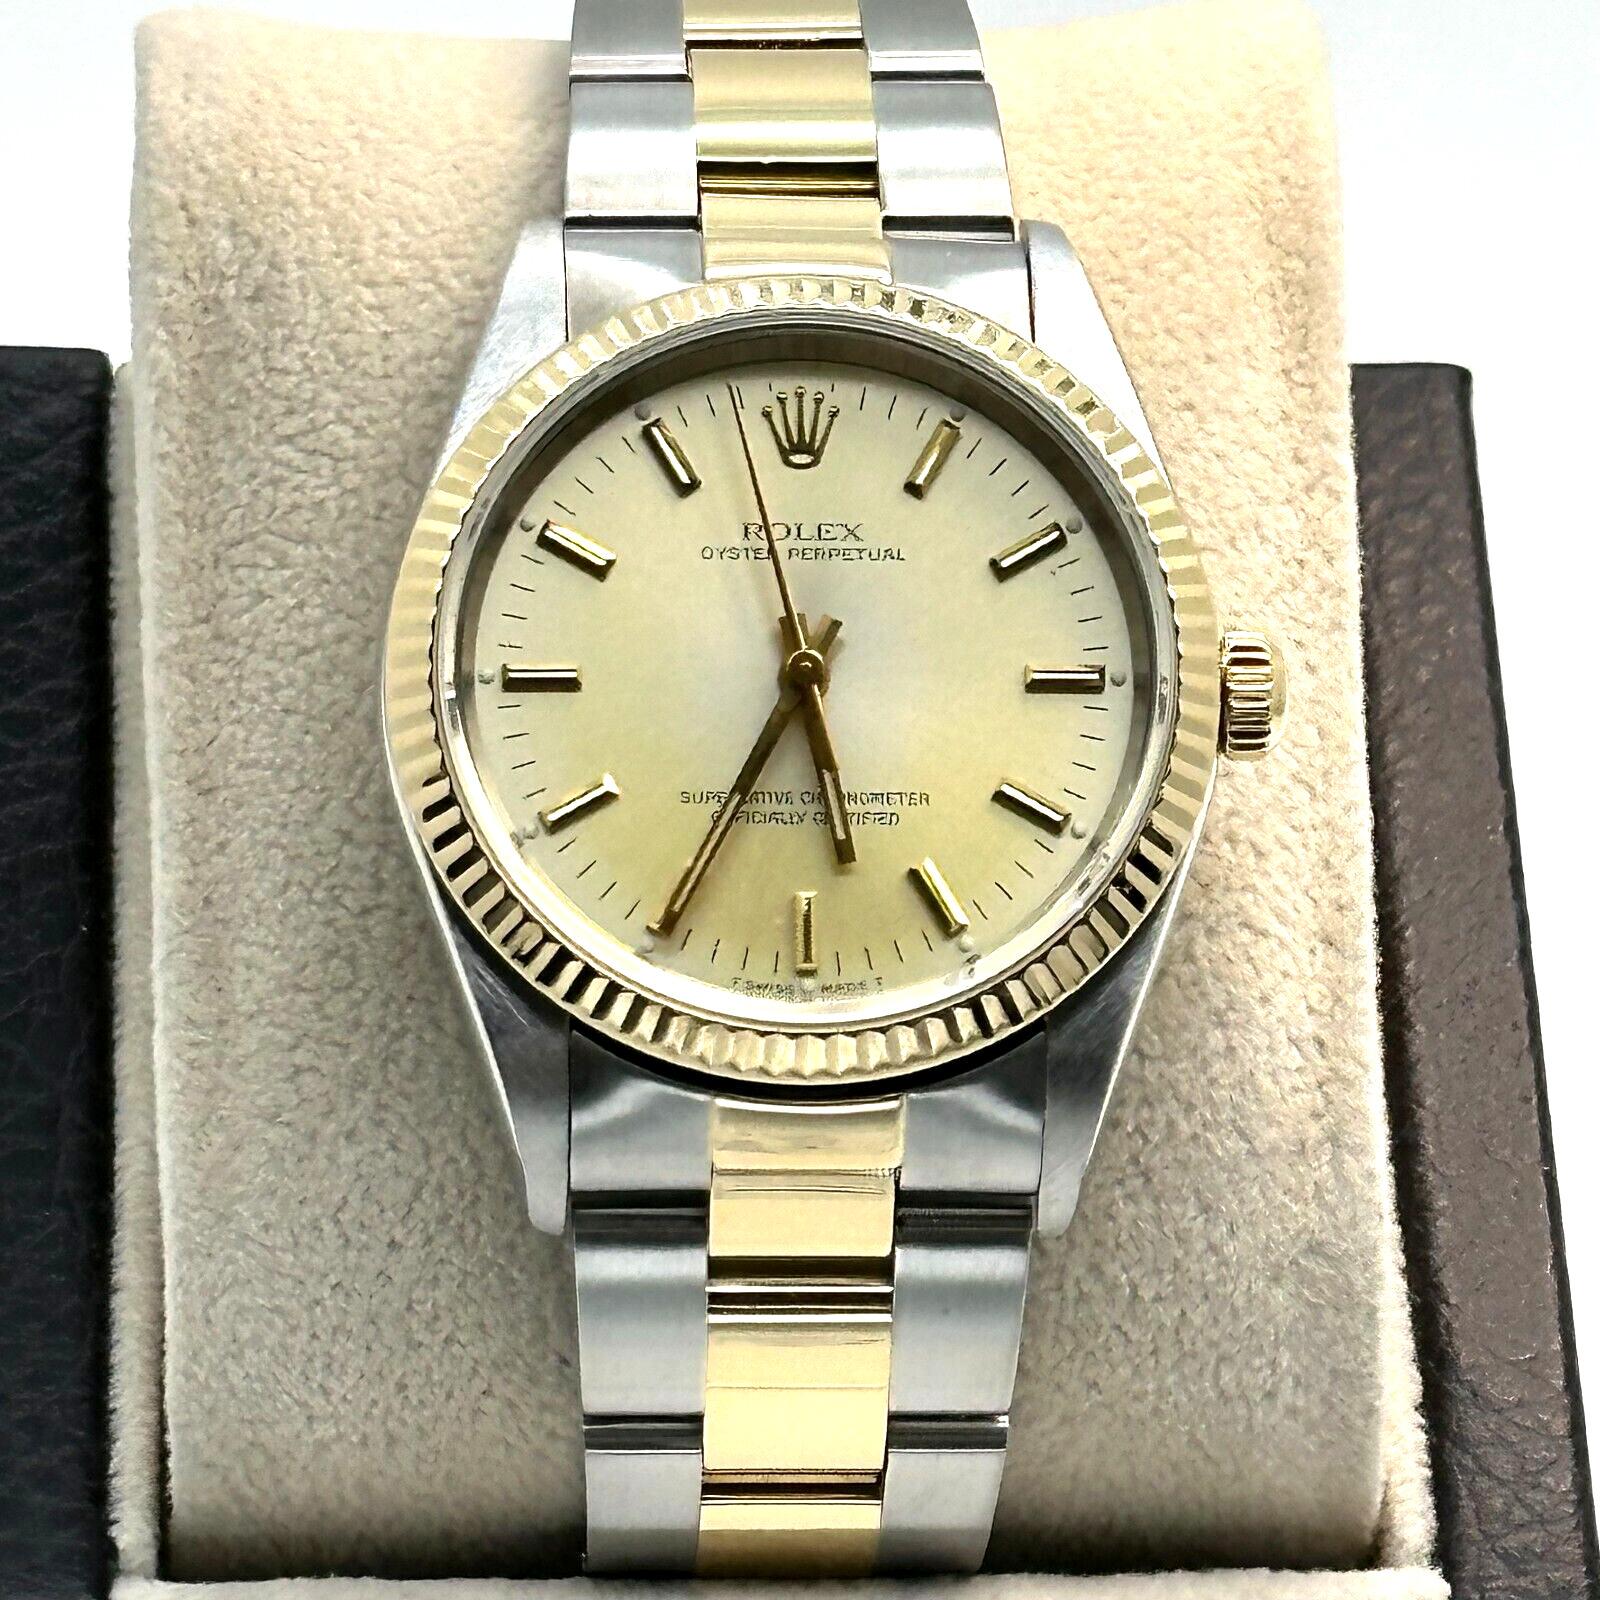 Style Number: 14233

Serial: P237***

Year: 2000

Model: Oyster Perpetual

Case Material: Stainless Steel

Band: 18K Yellow Gold & Stainless Steel

Bezel: 18K Yellow Gold

Dial: Faded Champagne Dial

Face: Sapphire Crystal

Case Size: